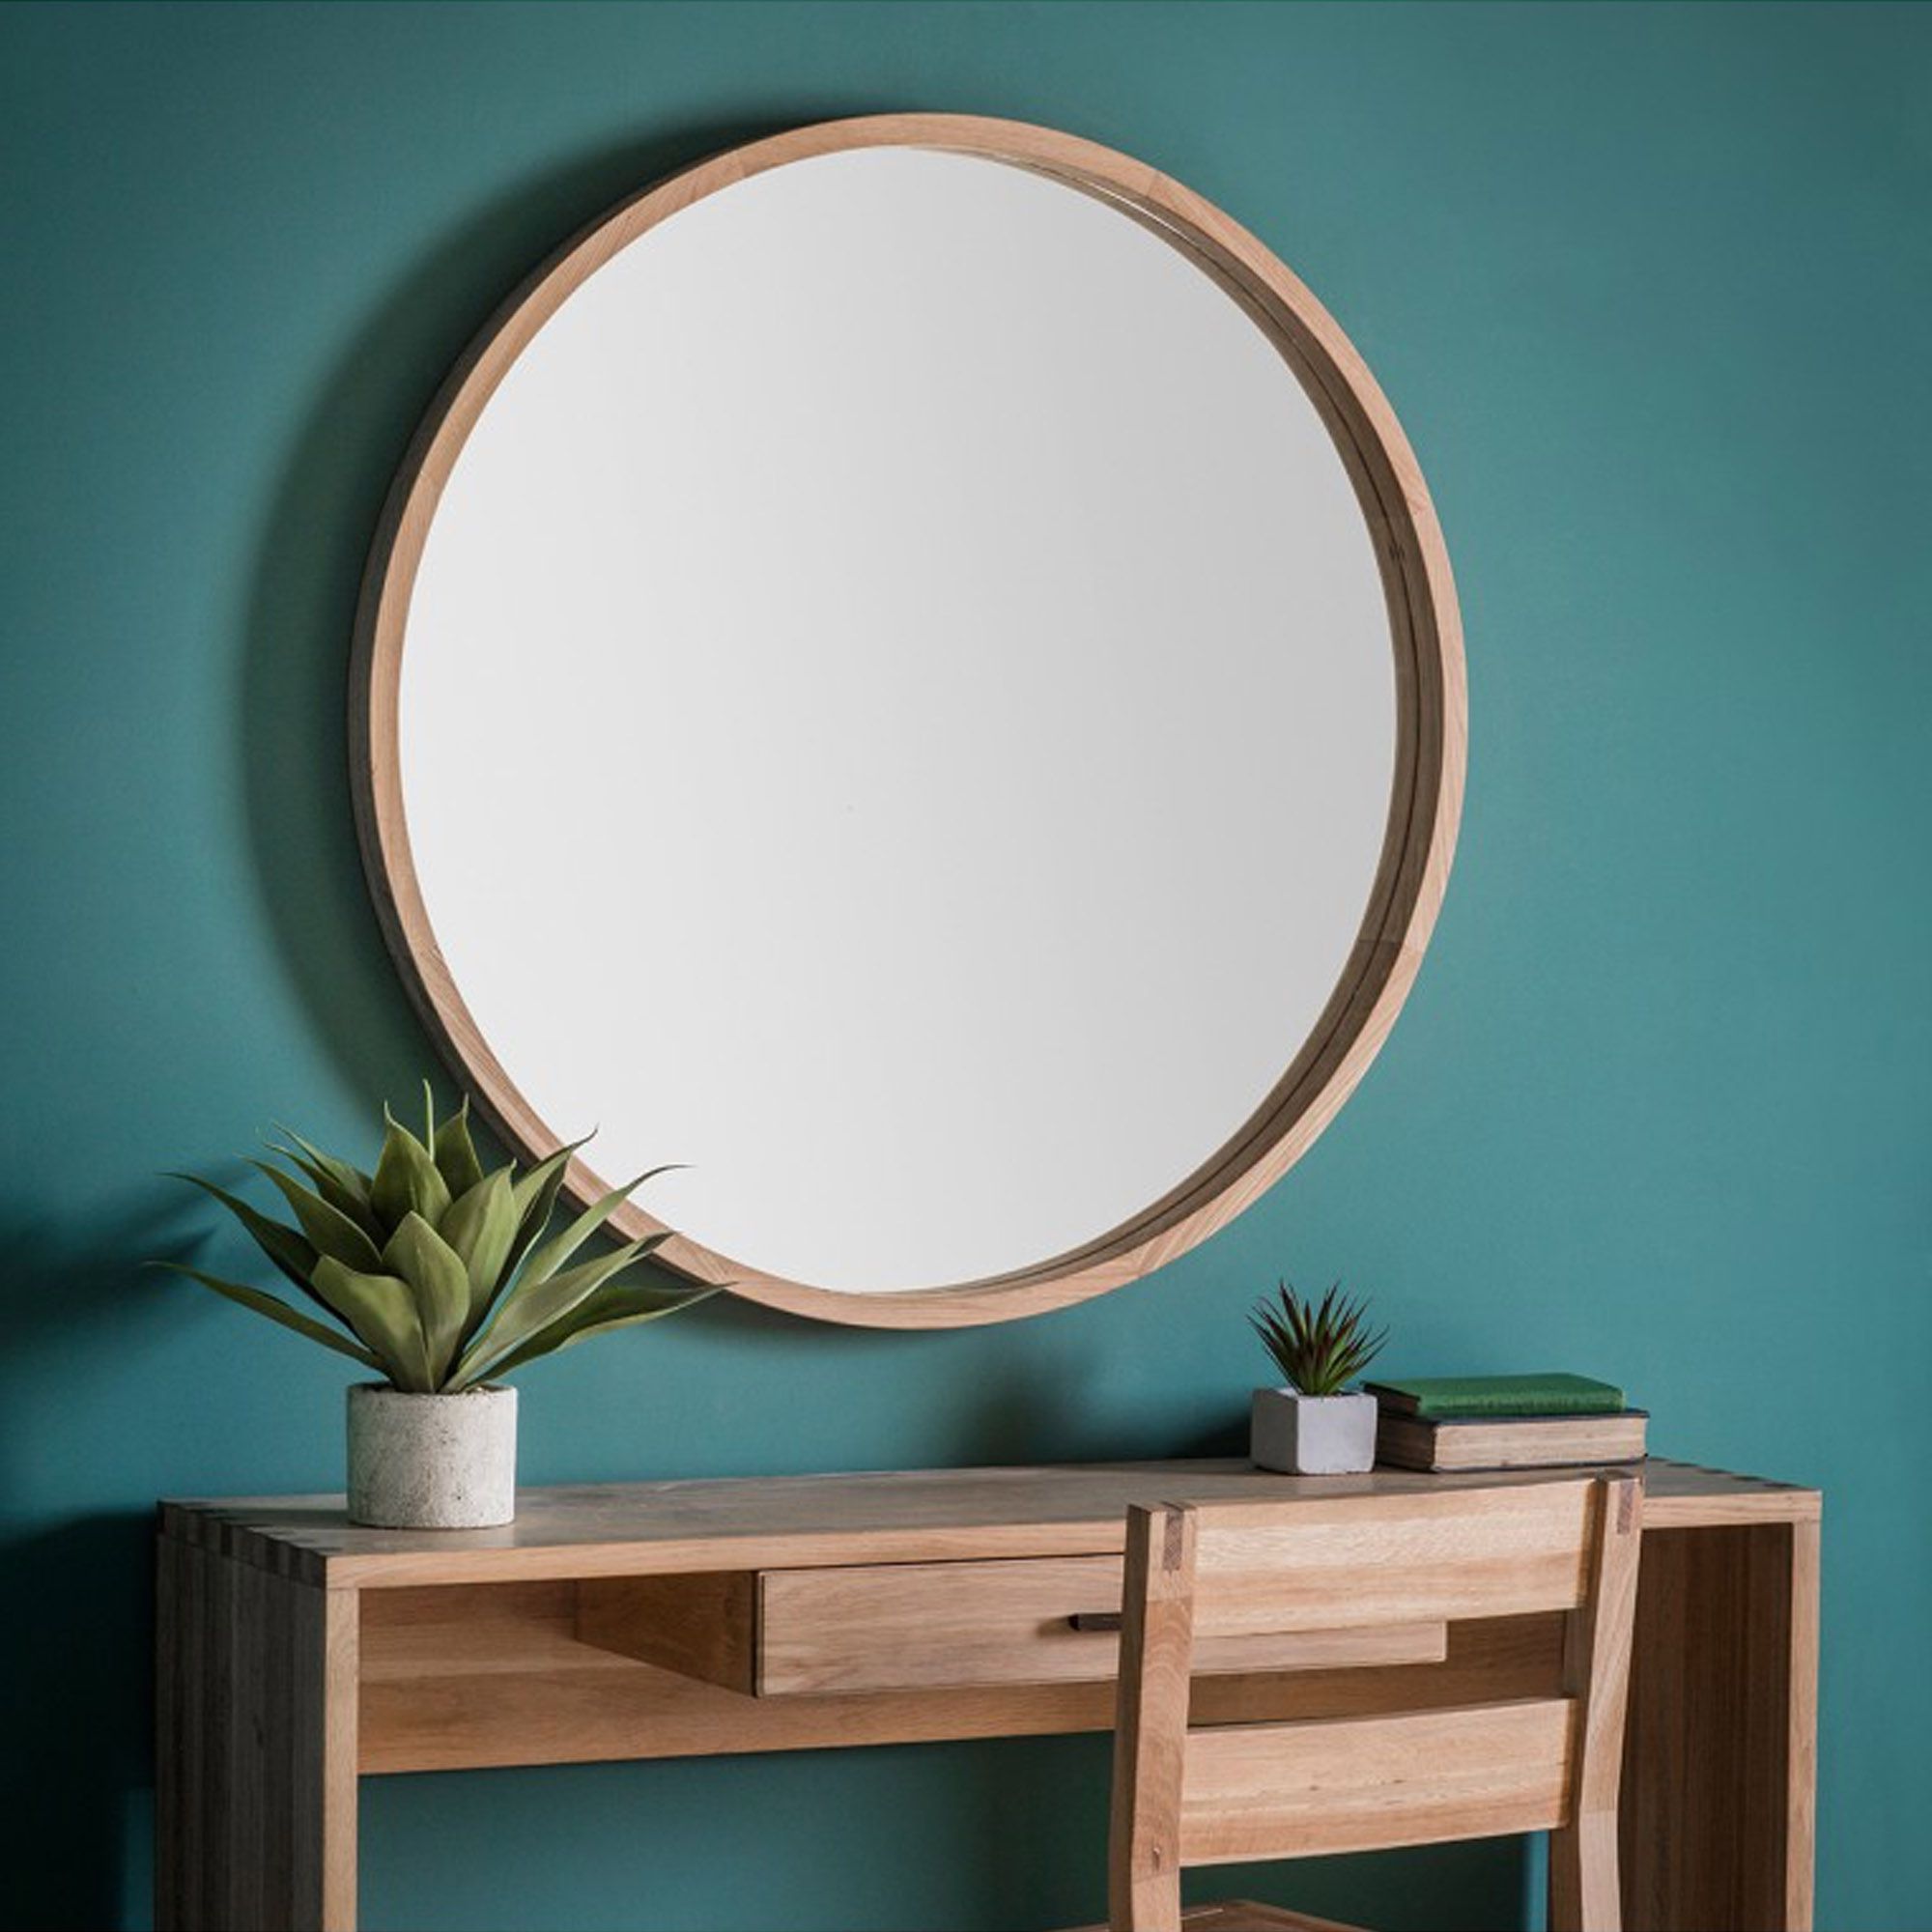 Homesdirect365 For Scalloped Round Modern Oversized Wall Mirrors (View 6 of 15)